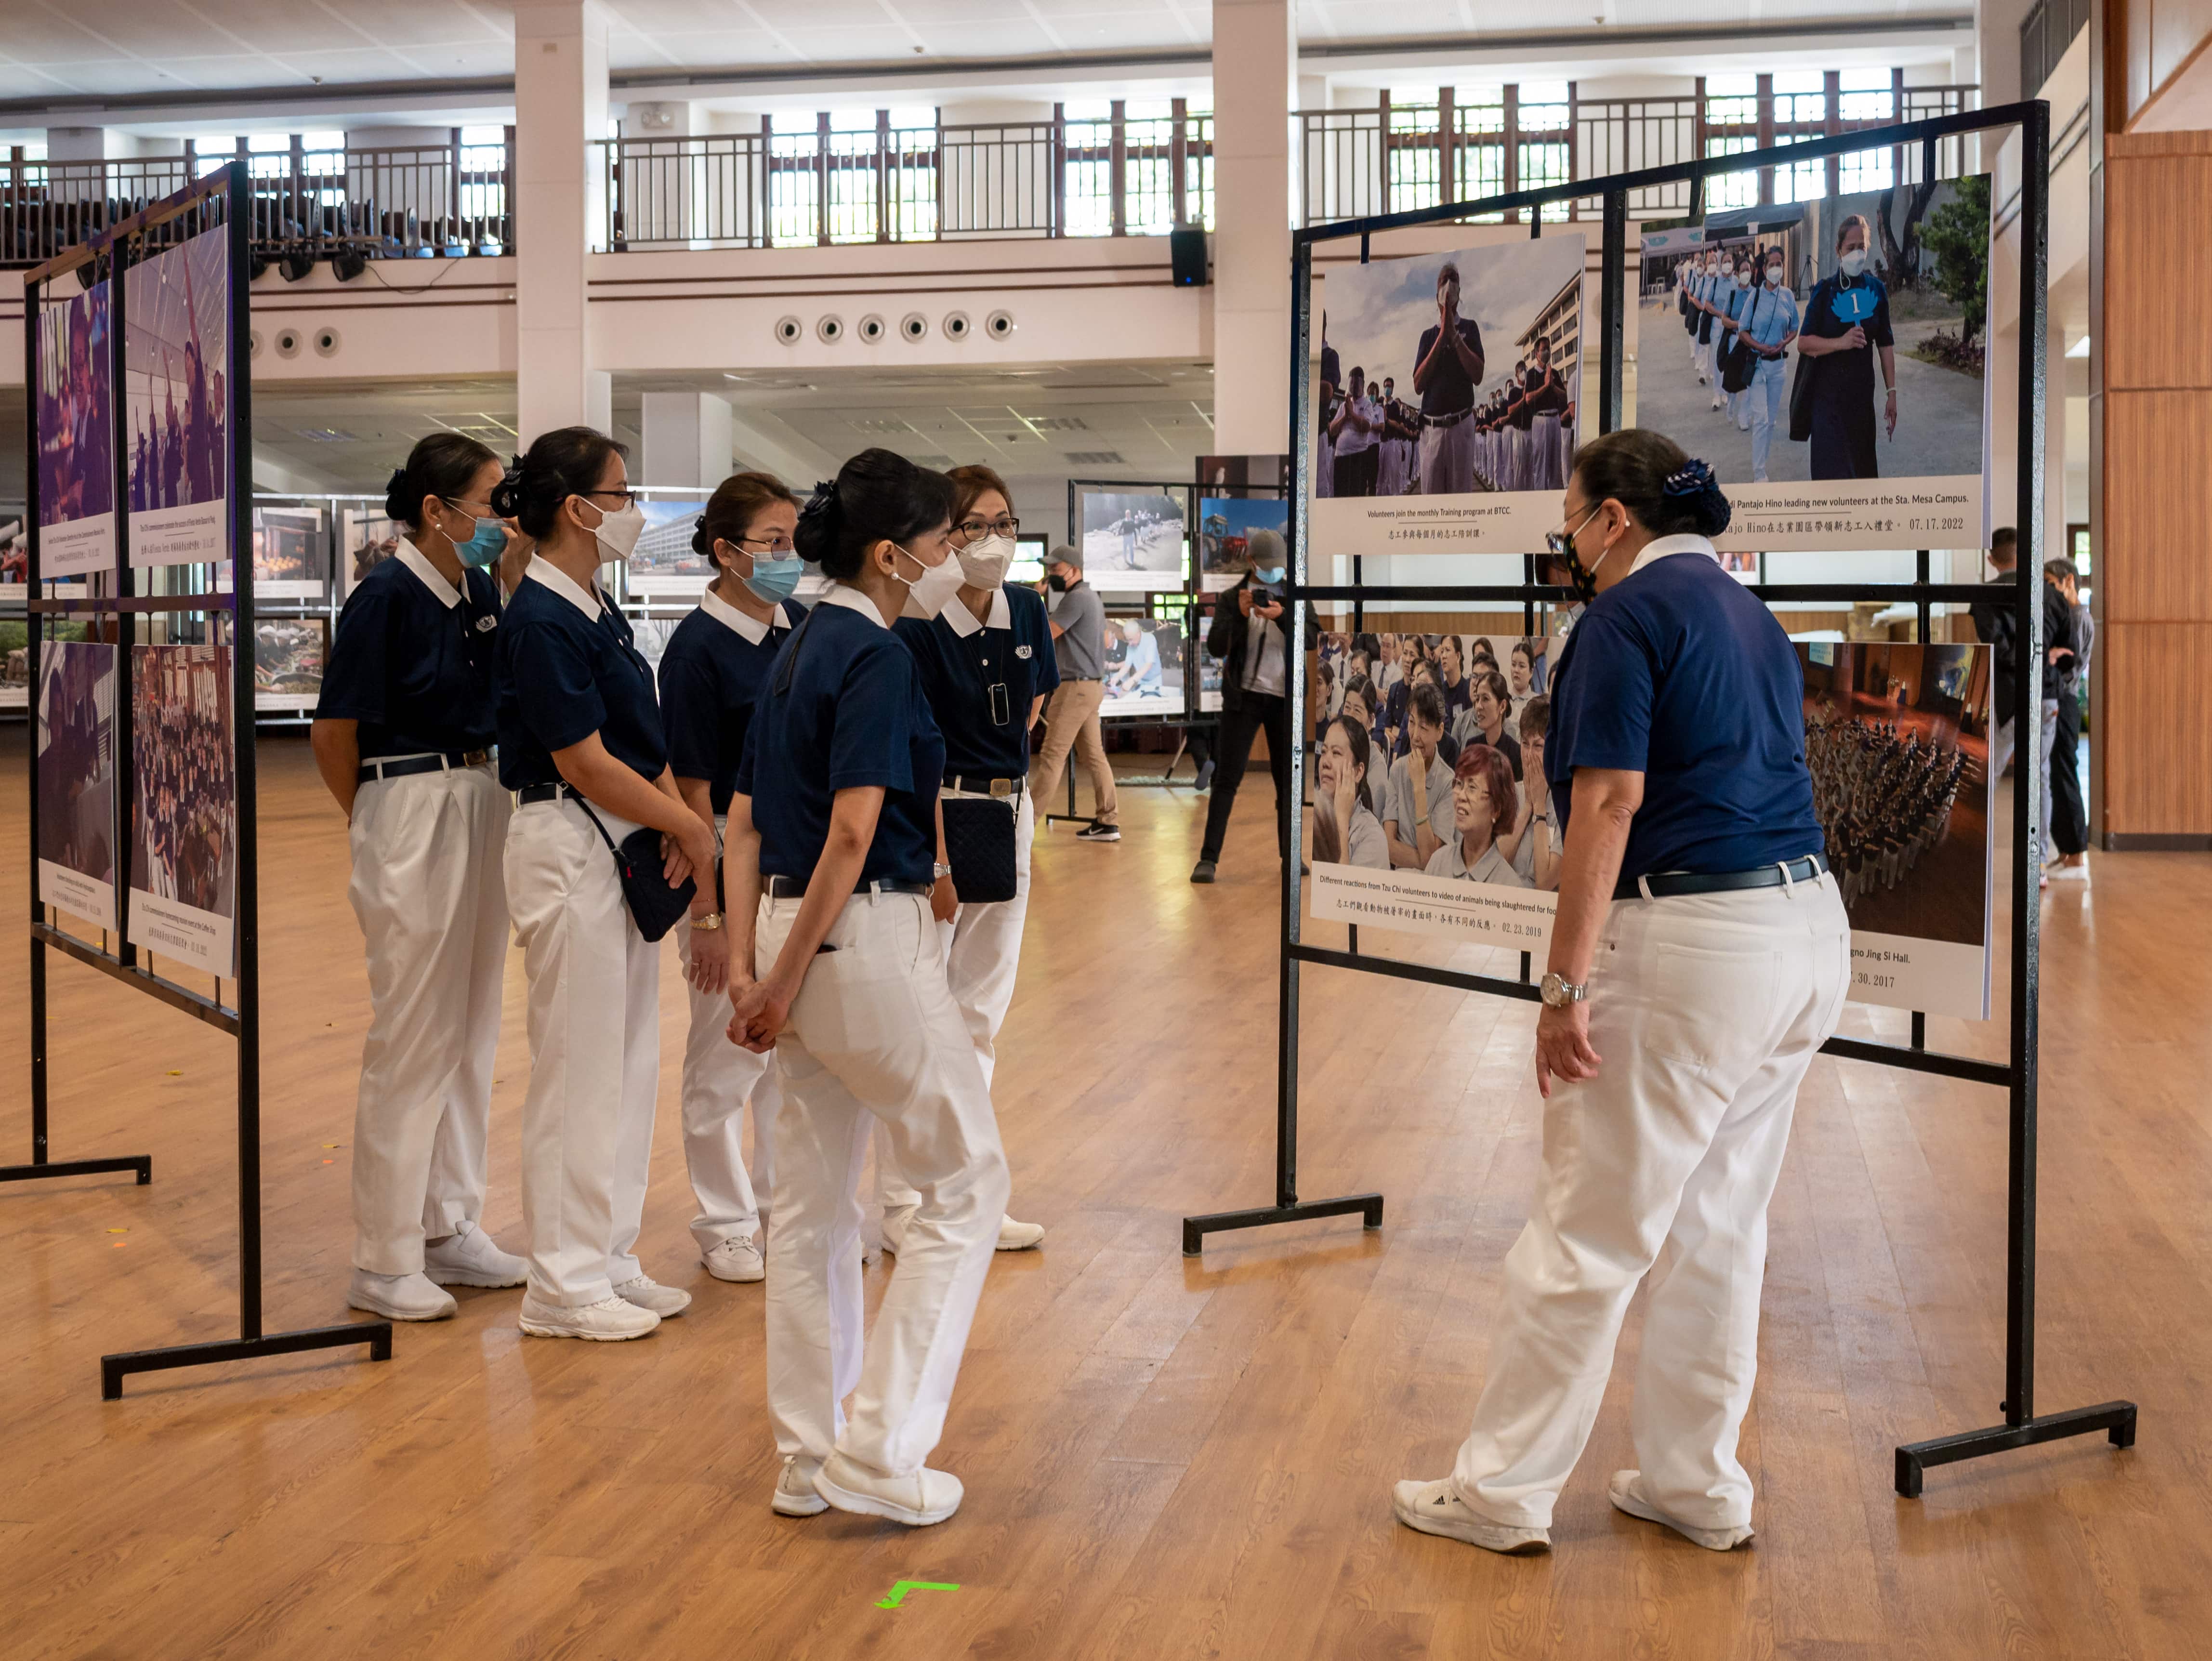 Tzu Chi volunteers are given a tour of the gallery by Commissioner Judy Lao.【Photo by Daniel Lazar】